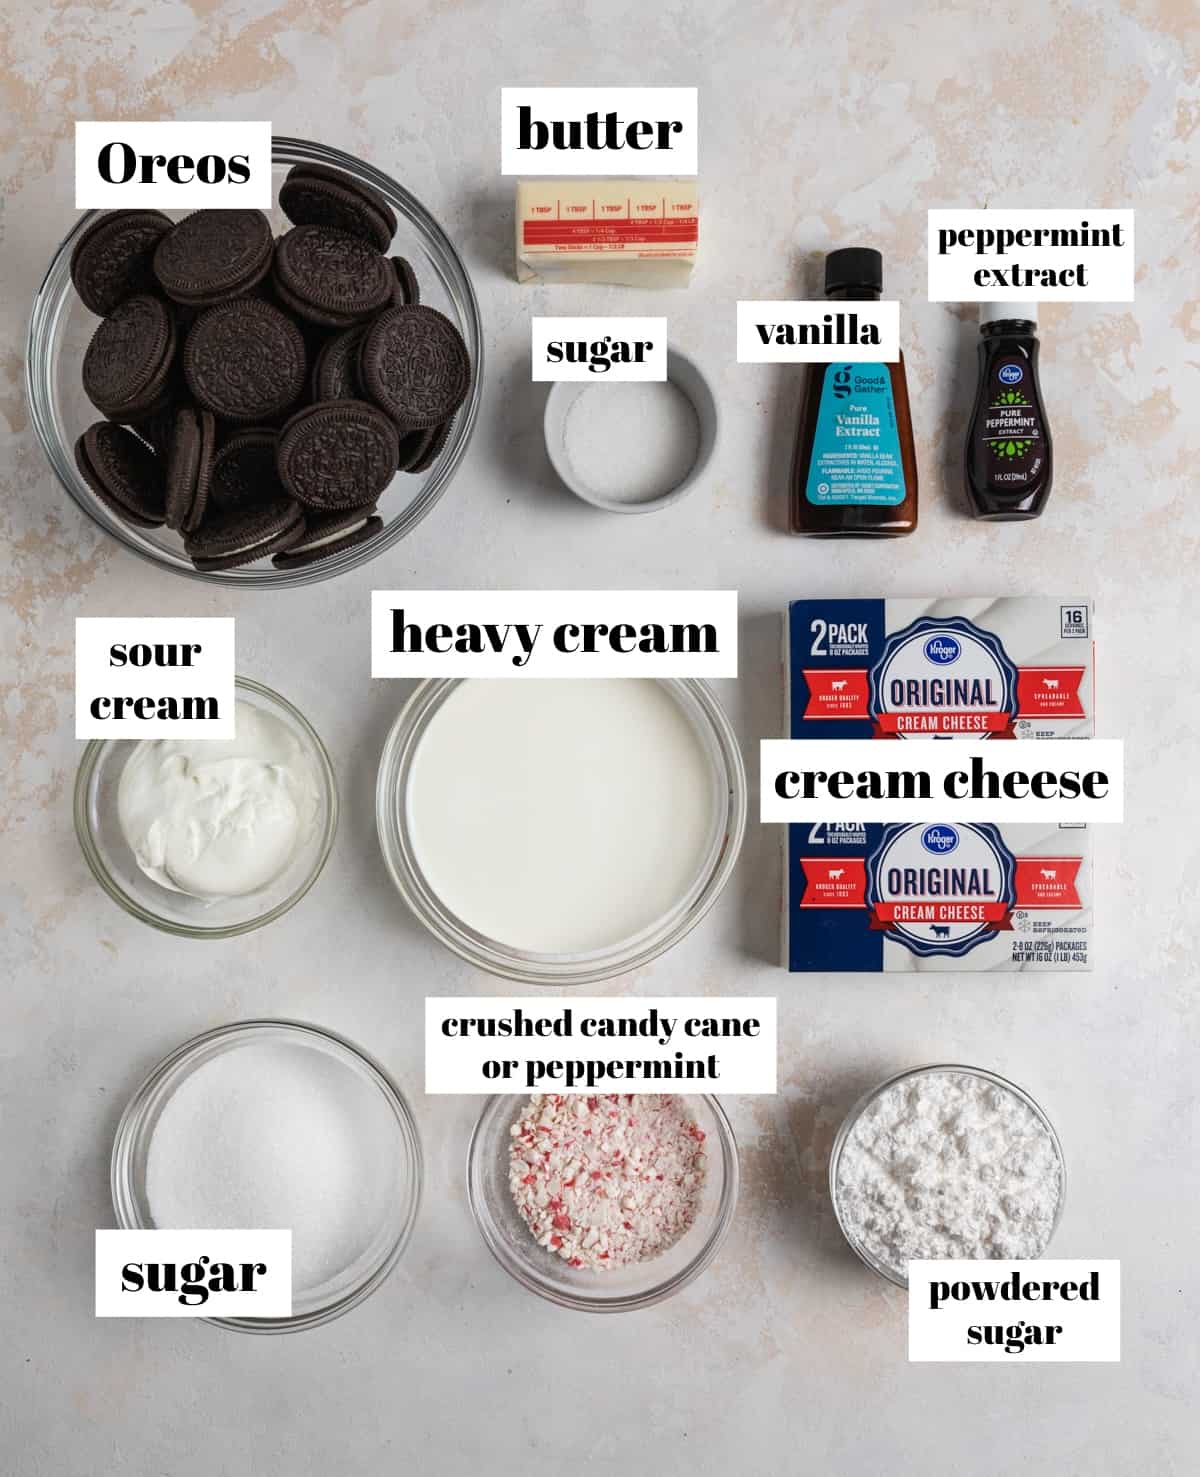 Oreos, crushed candy canes, cream cheese, powdered sugar and other ingredients to make peppermint cheesecake.